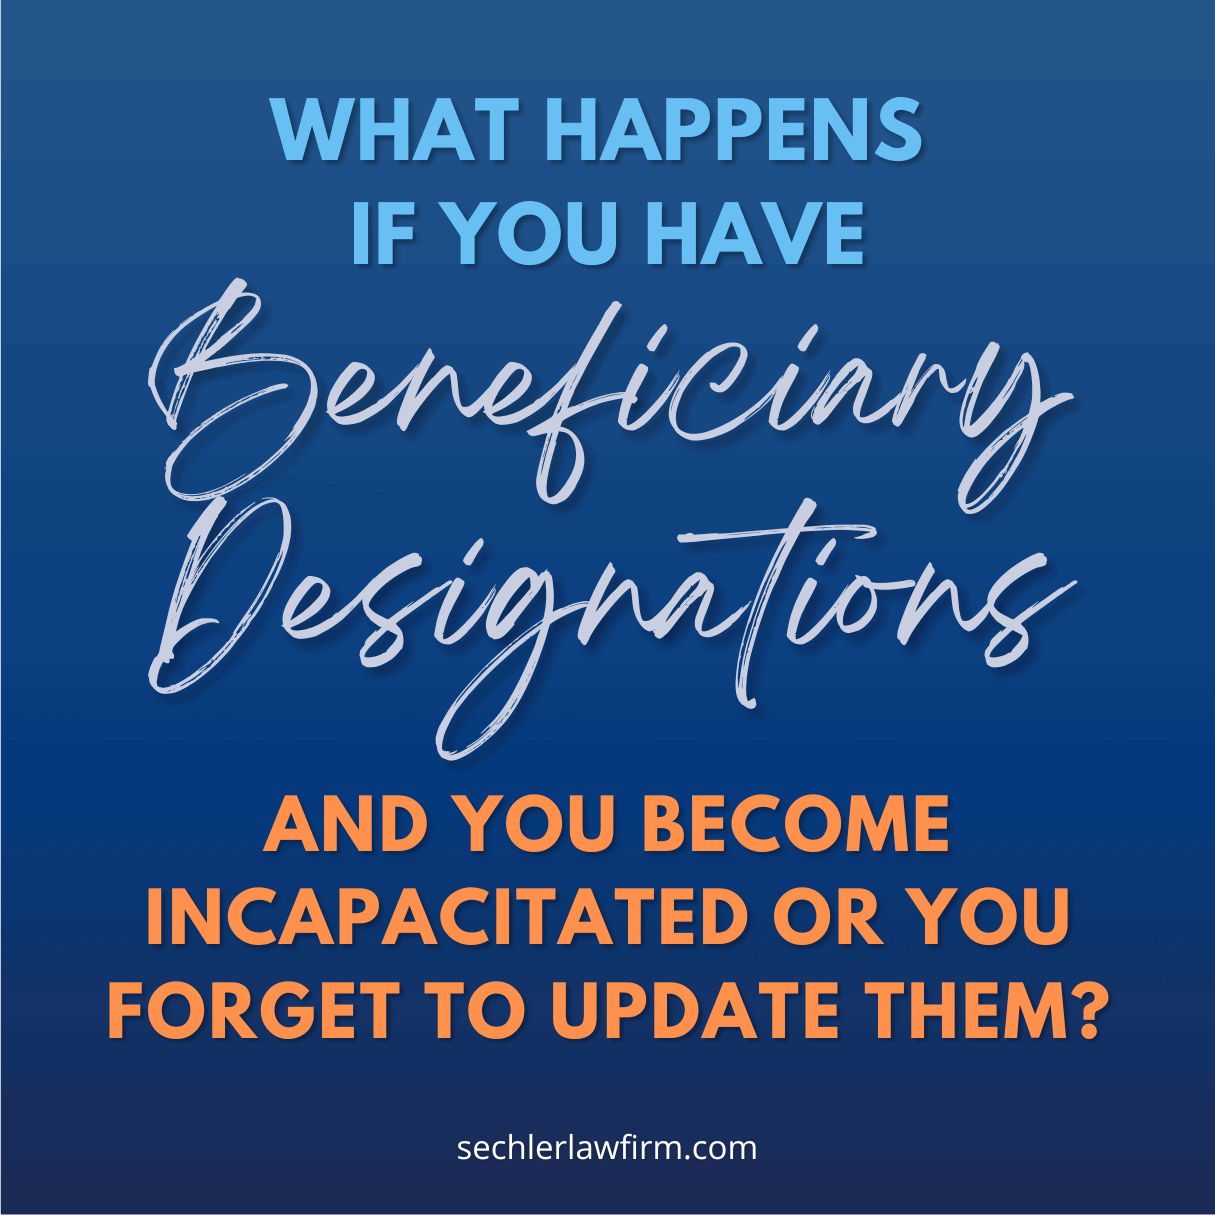 What Happens If You Forget to Update Beneficiary Designations?